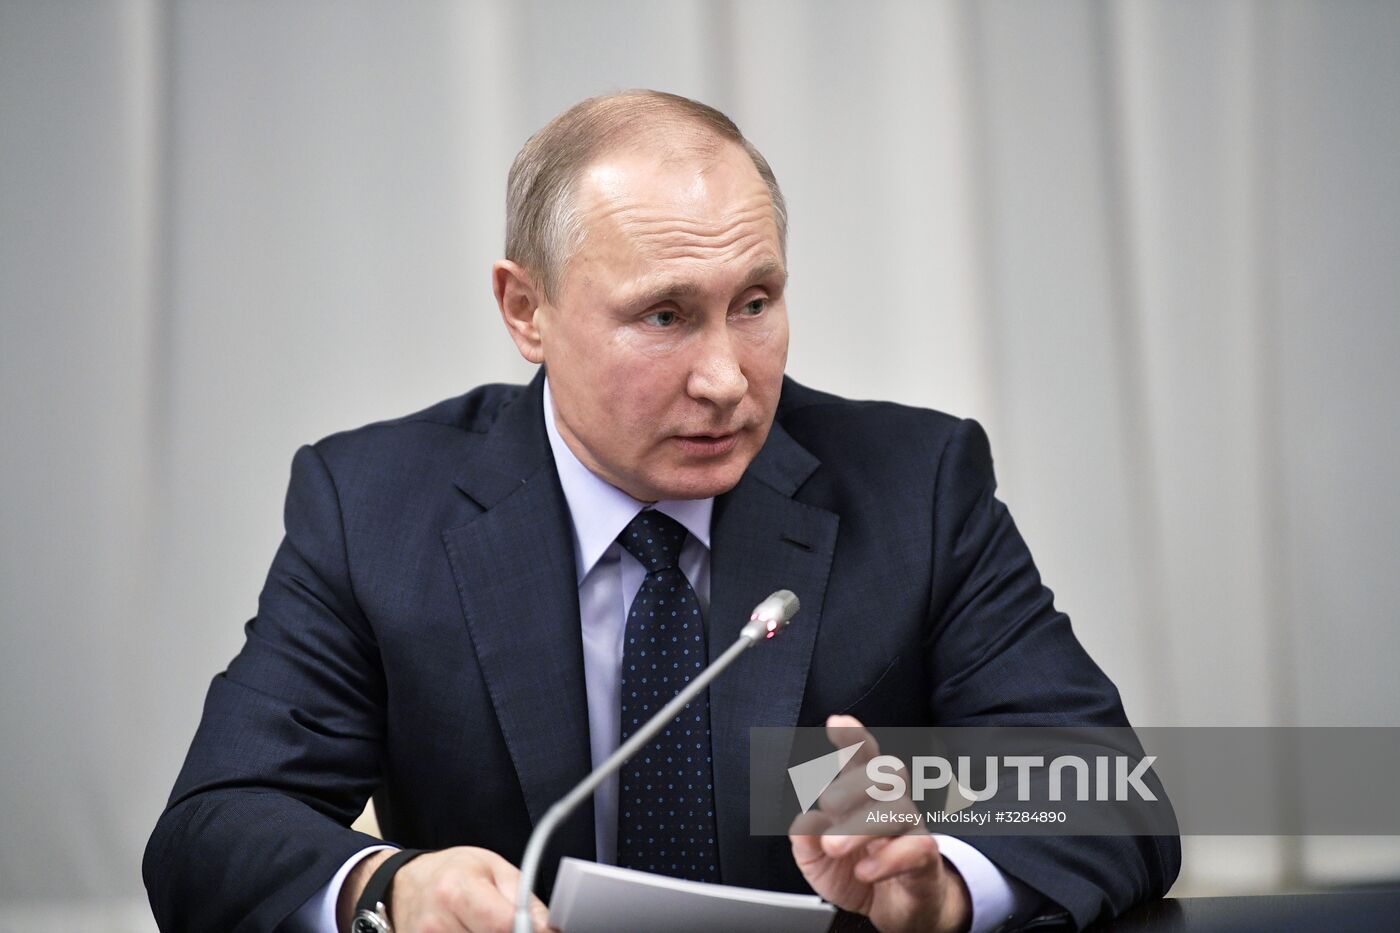 Vladimir Putin meets with members of Economic Council of Franco-Russian Chamber of Commerce and Industry